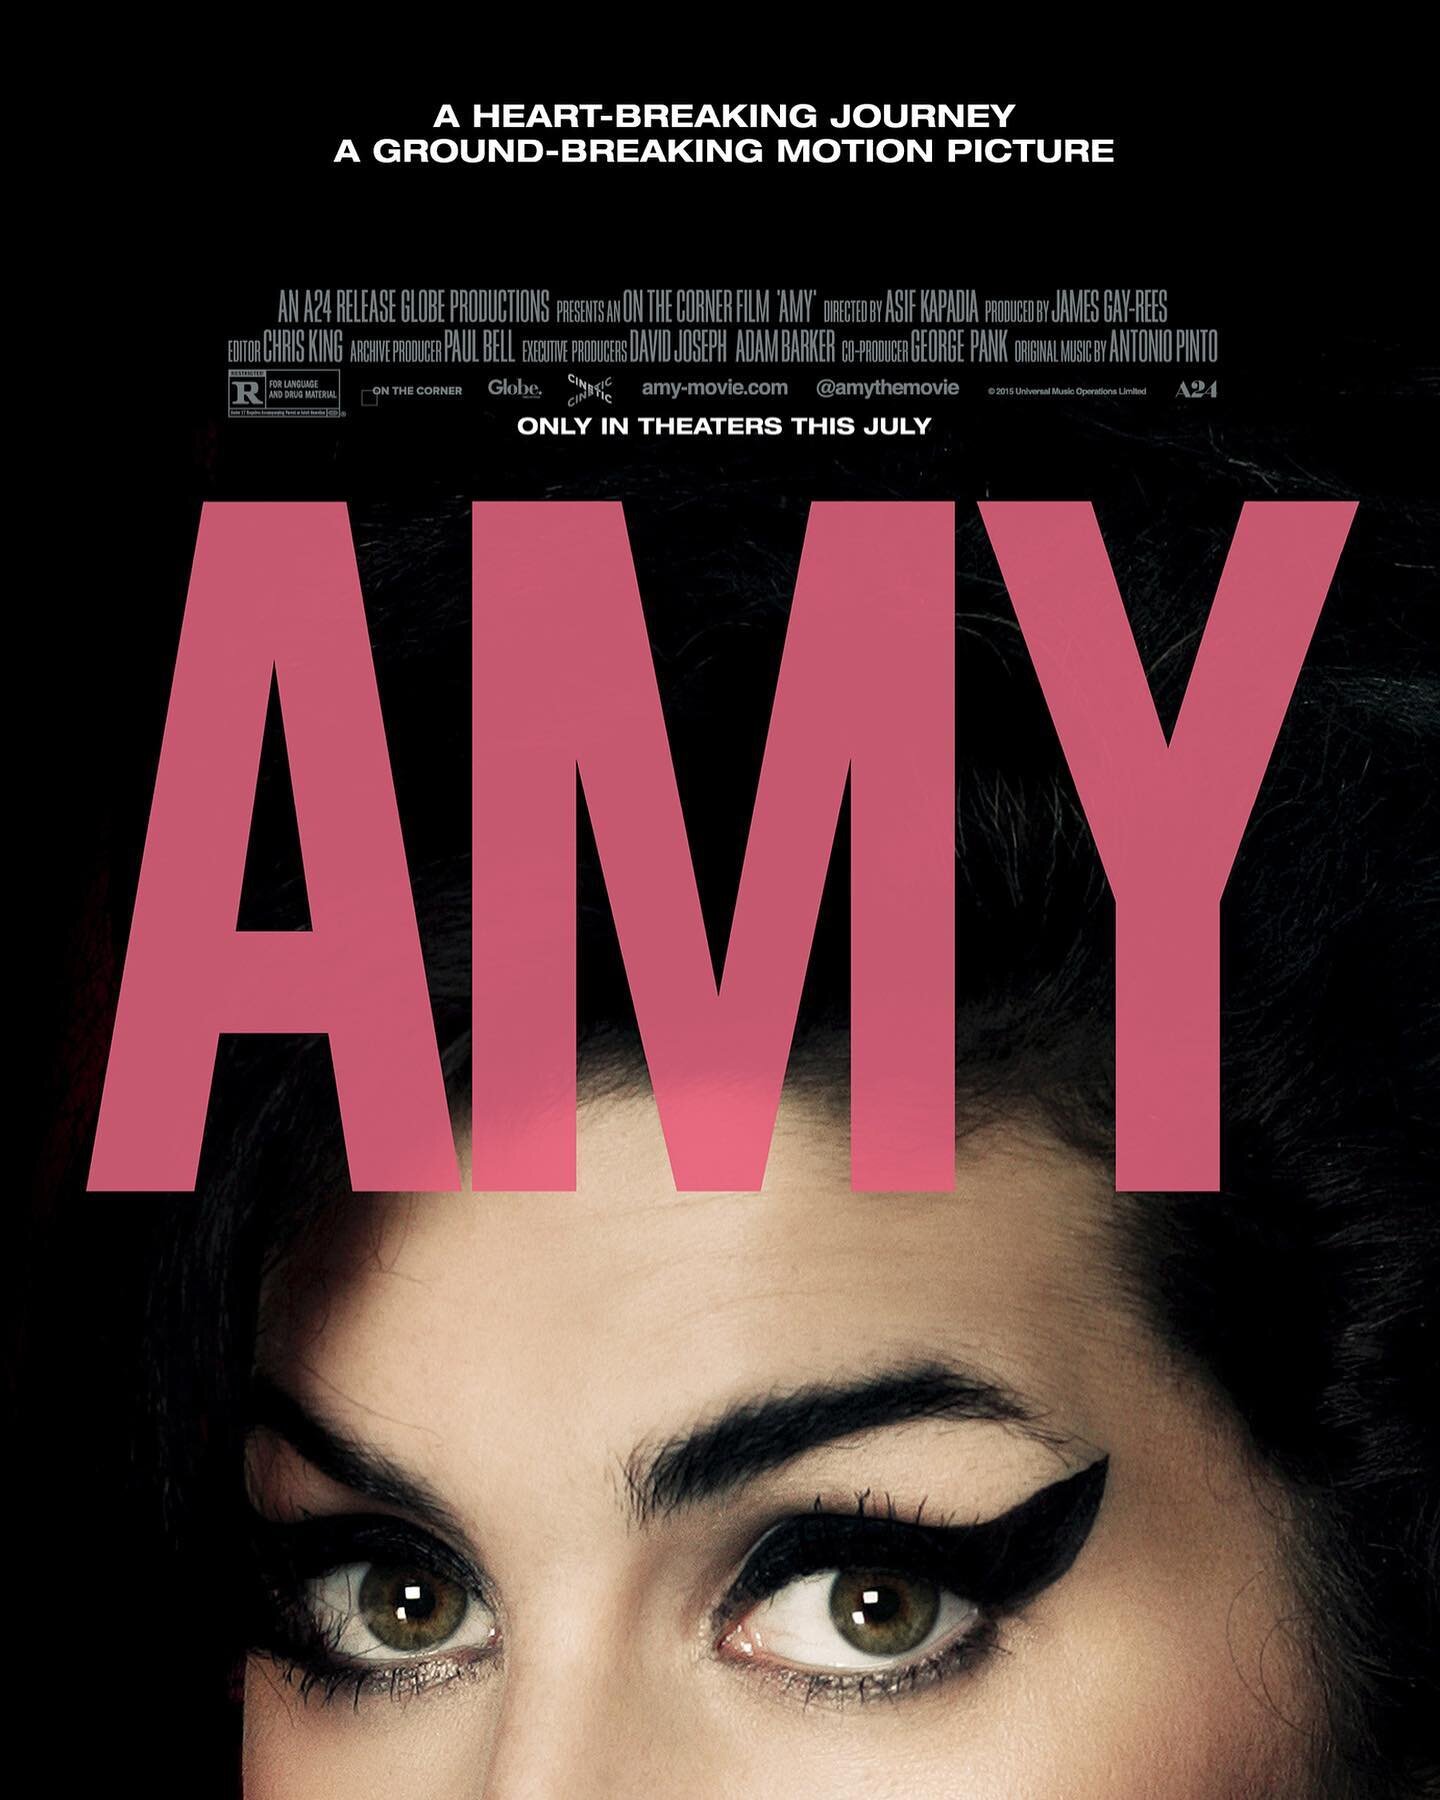 In reaction to the announcement of an Amy Winehouse Hollywood biopic in the works, I revisited the amazing 2015 documentary &lsquo;Amy&rsquo;. Using intimate personal interviews from Winehouse&rsquo;s inner circle and extensive archival footage, &lsq